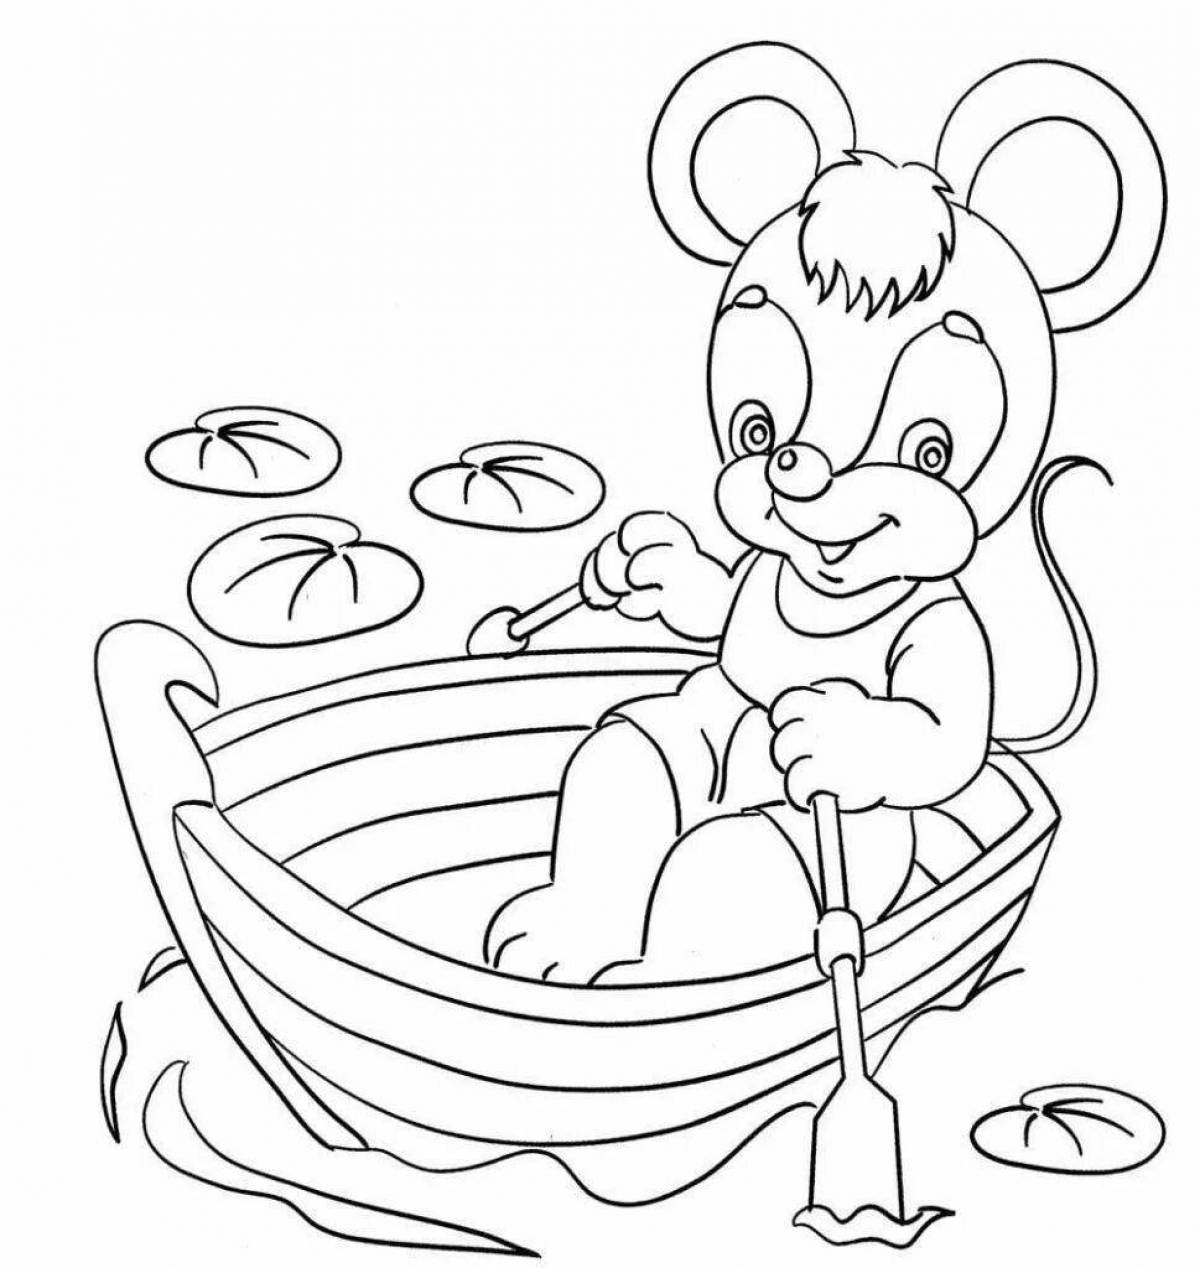 Fun coloring book for preschoolers 4-5 years old